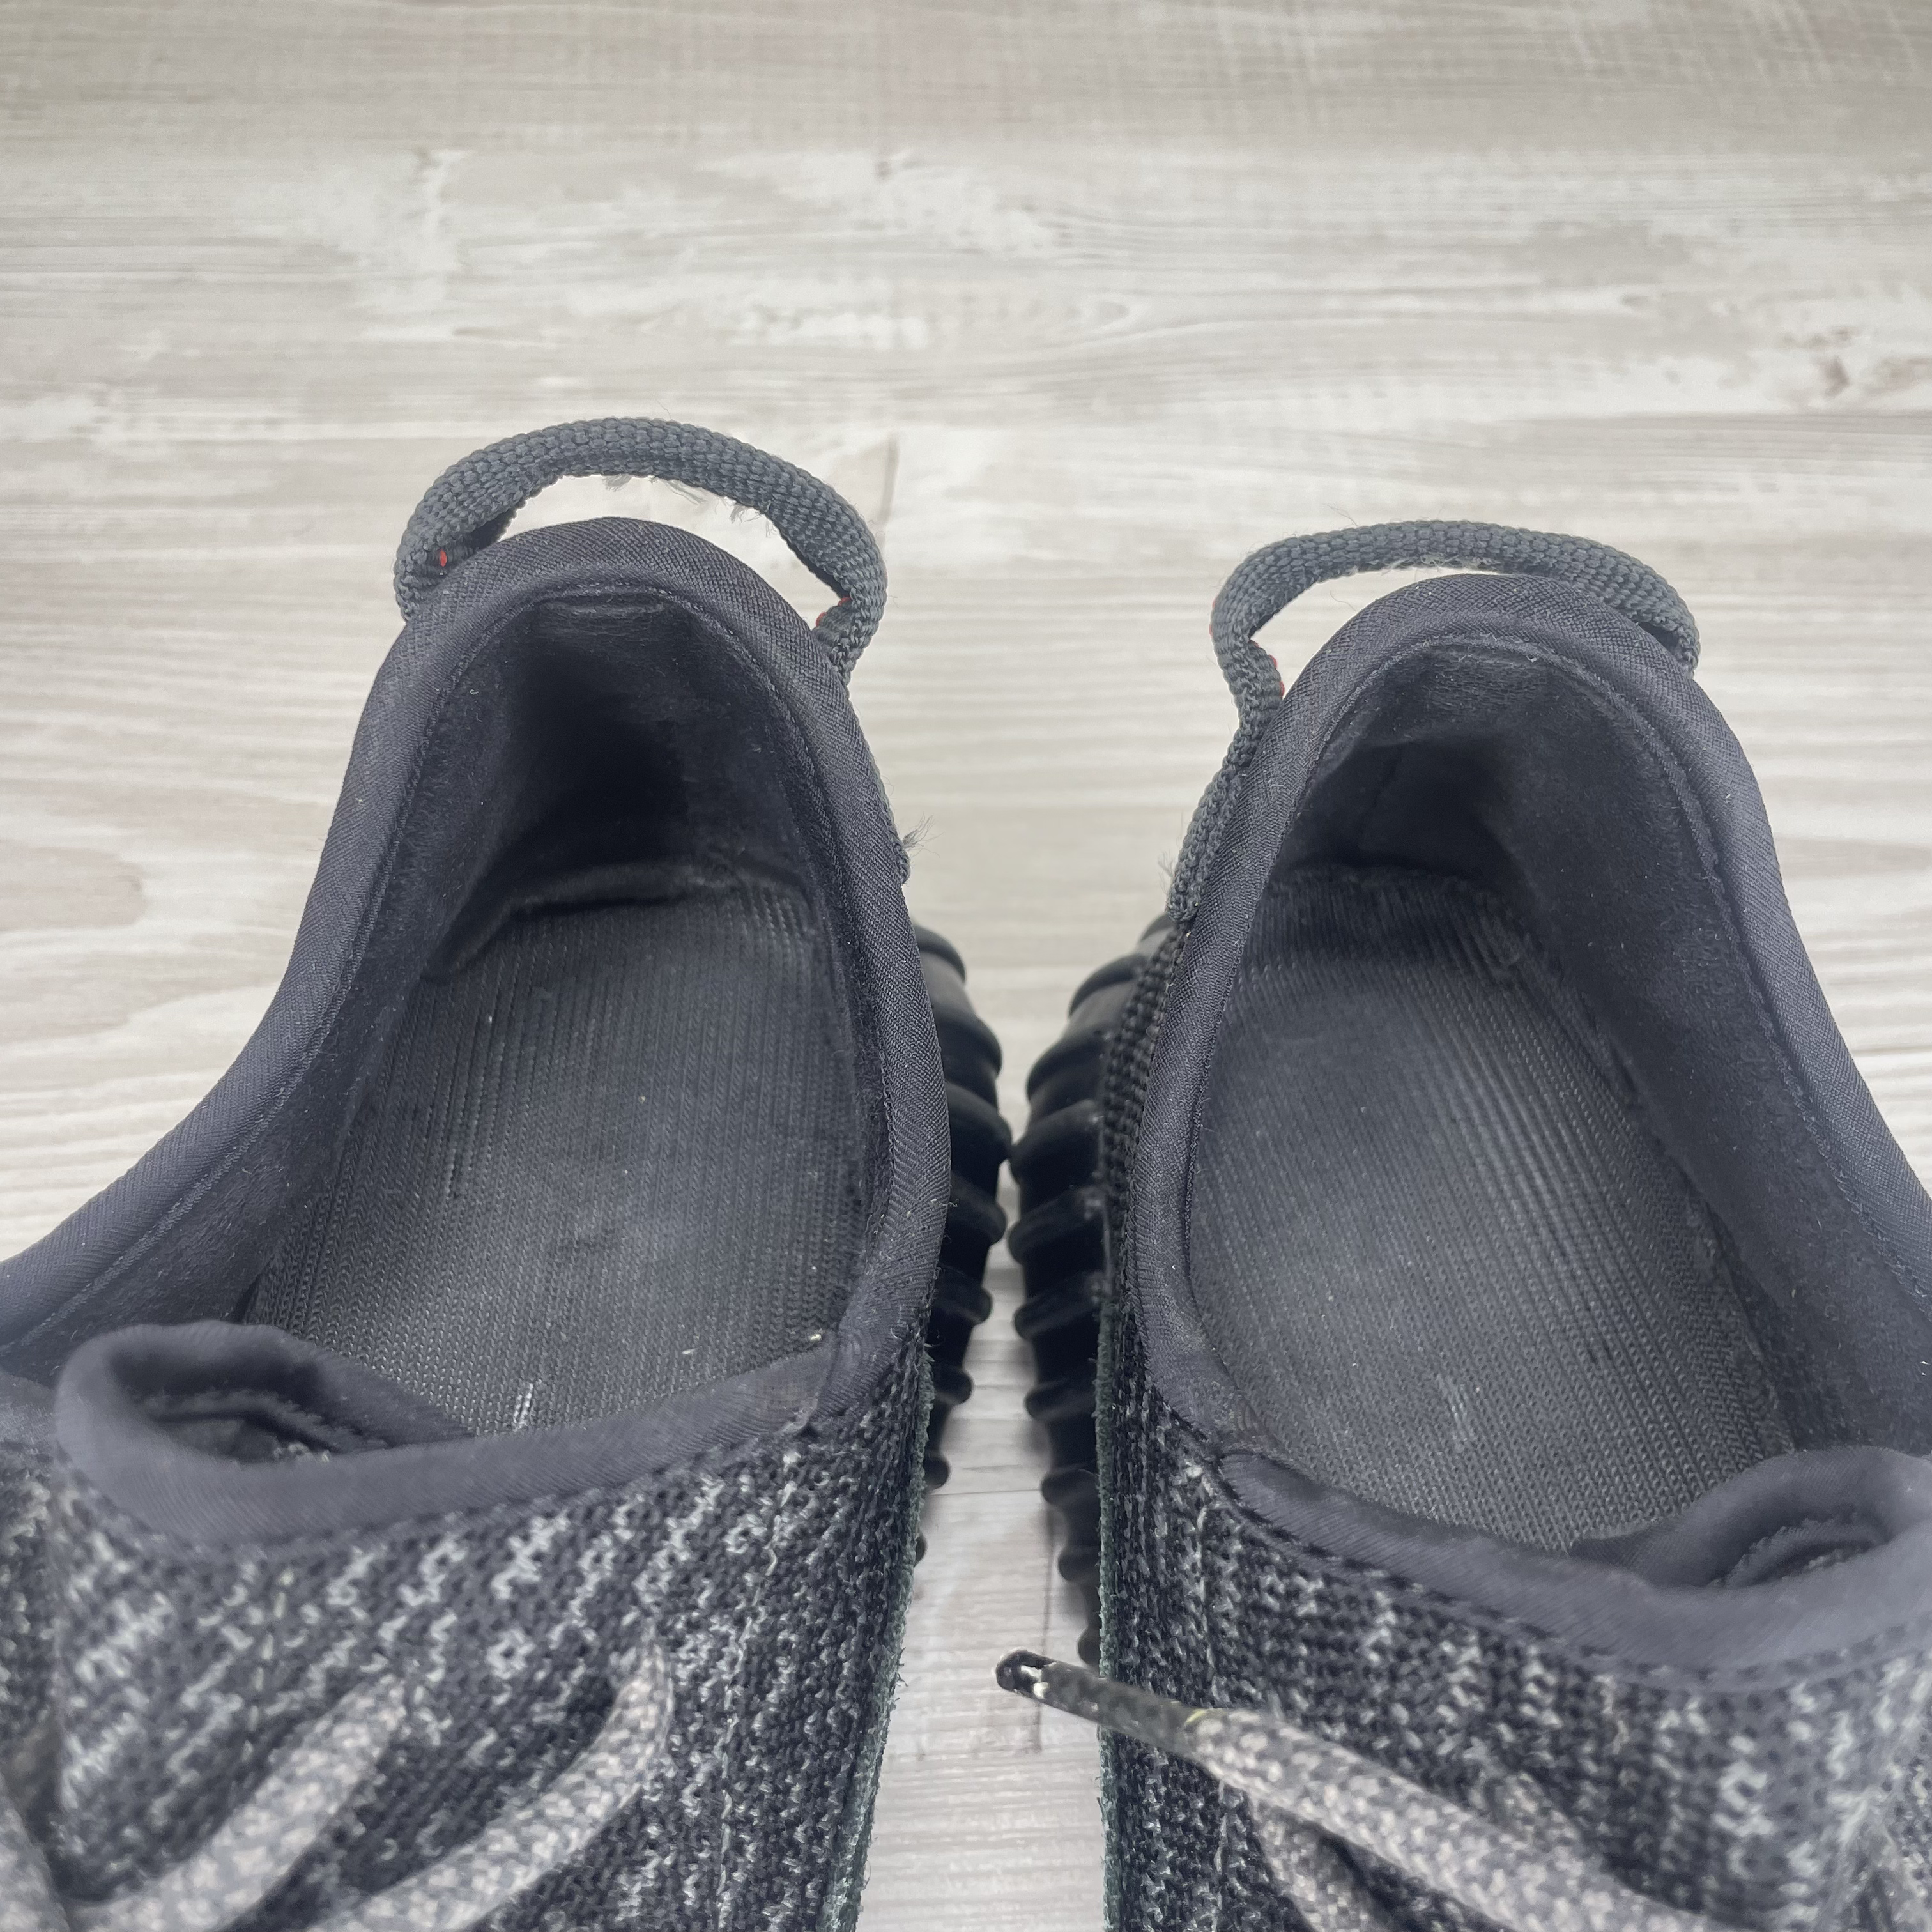 Adidas Yeezy 'Pirate Black' (45 1/3) – DelsouX Universe